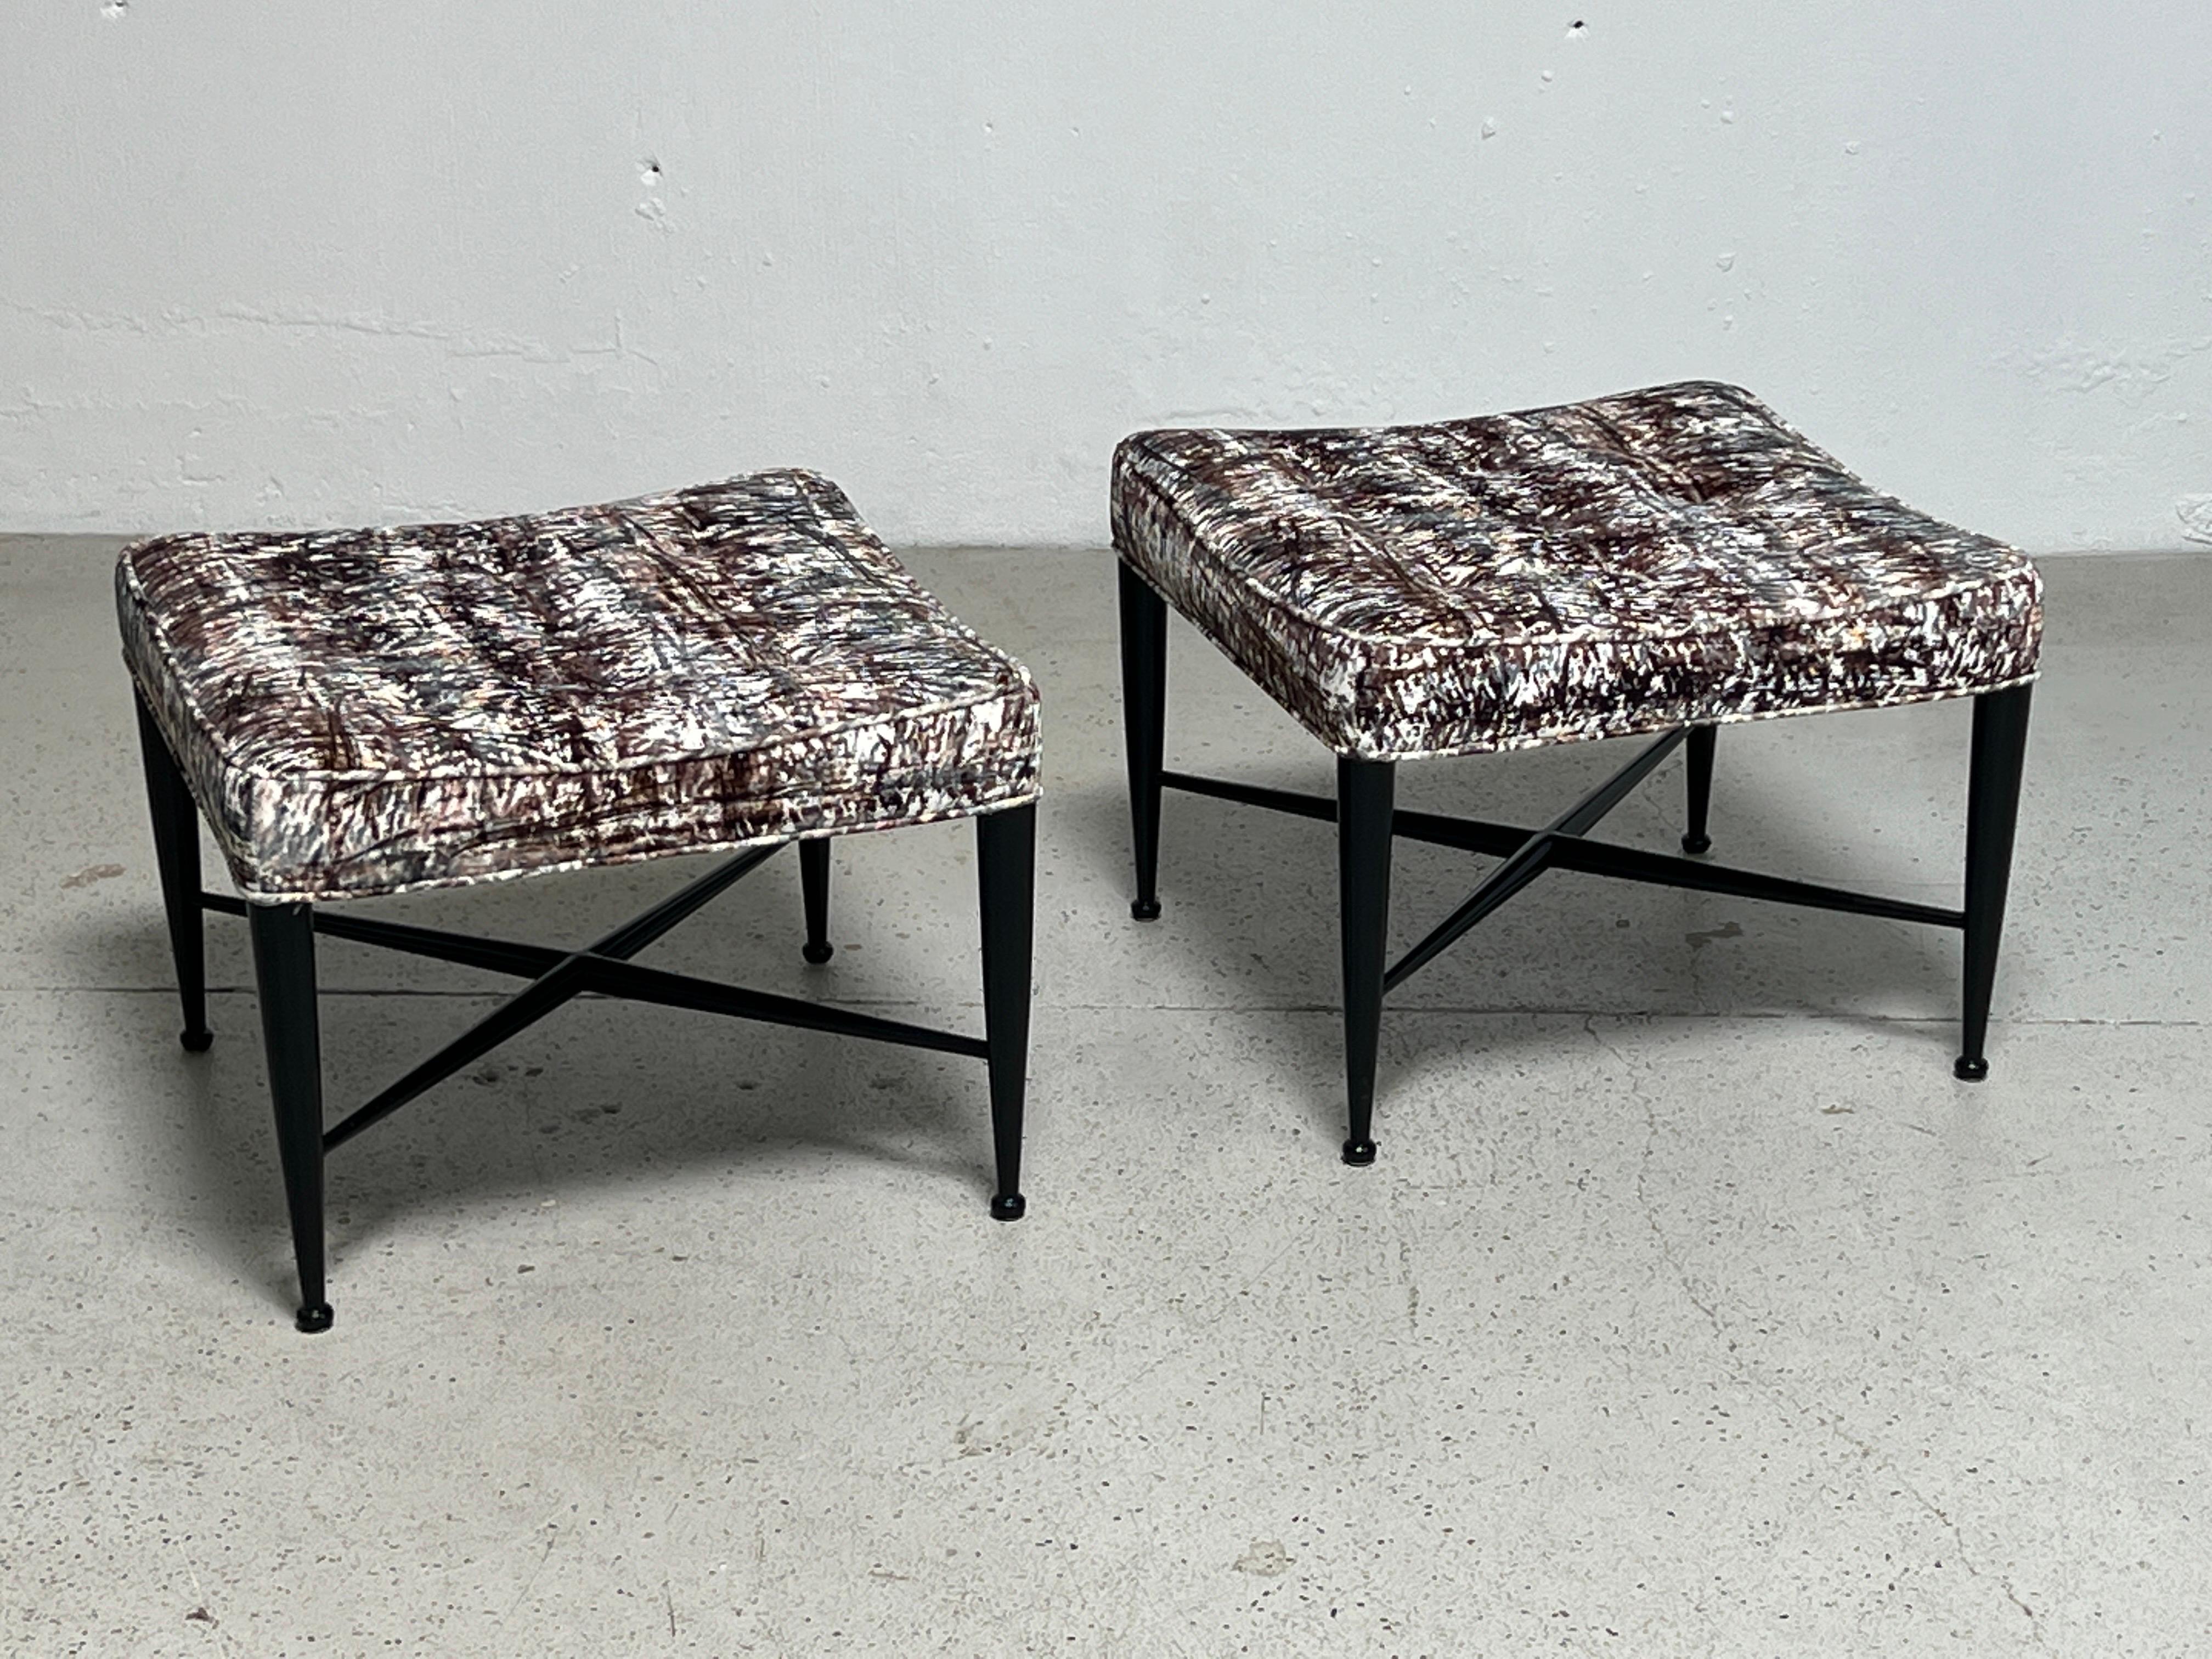 A beautifully restored pair of Dunbar Thebes stools designed by Edward Wormley.